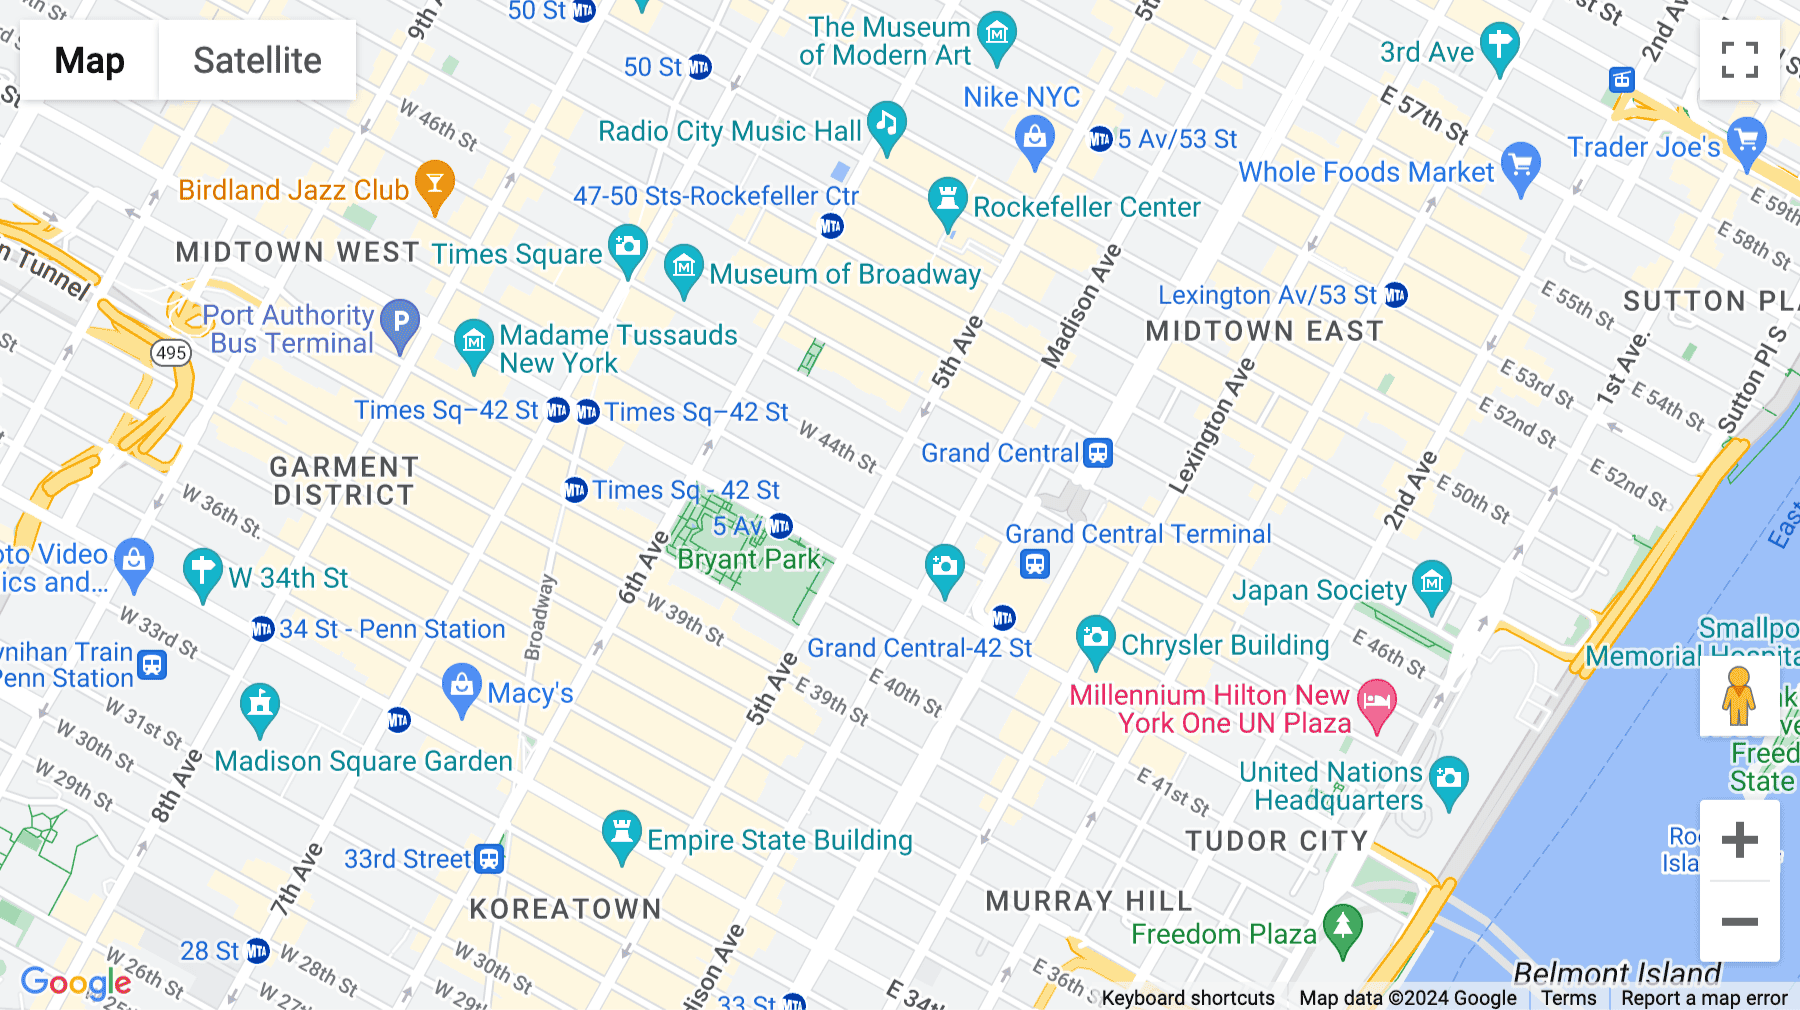 Click for interative map of (521) 521 5th Avenue, 17th Floor, New York City